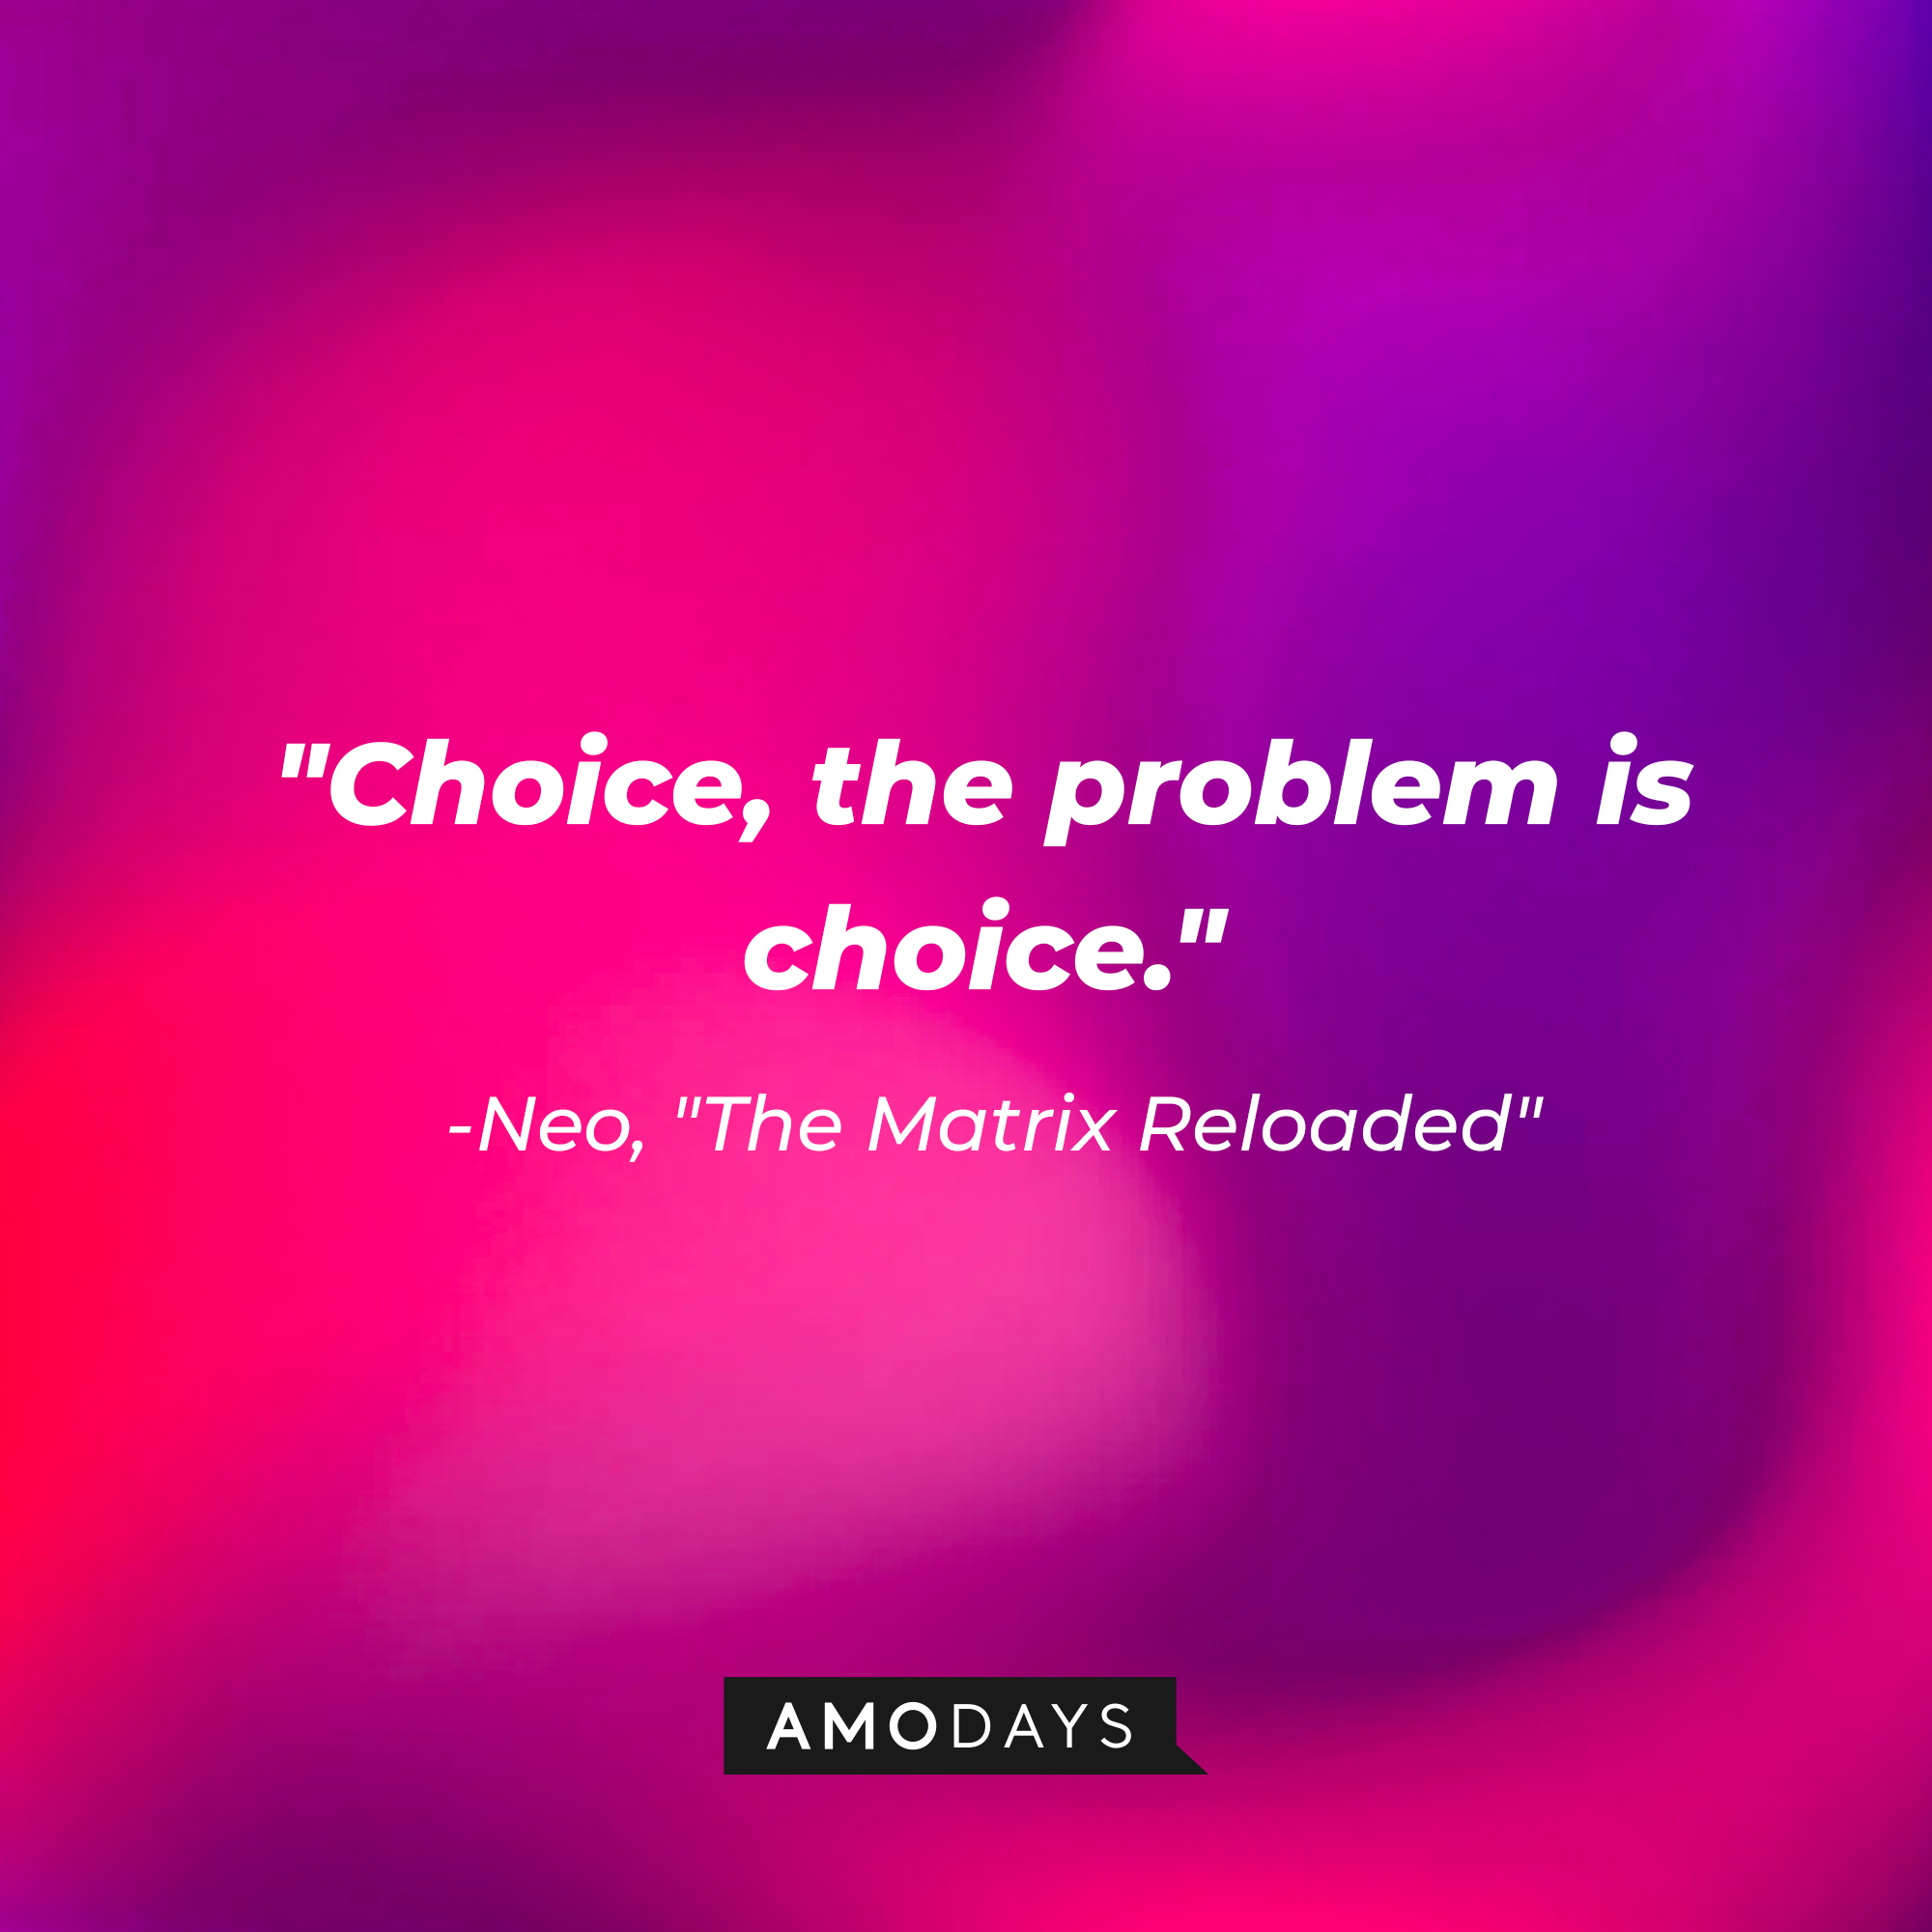 Neo's quote: "Choice, the problem is choice." | Source: AmoDays